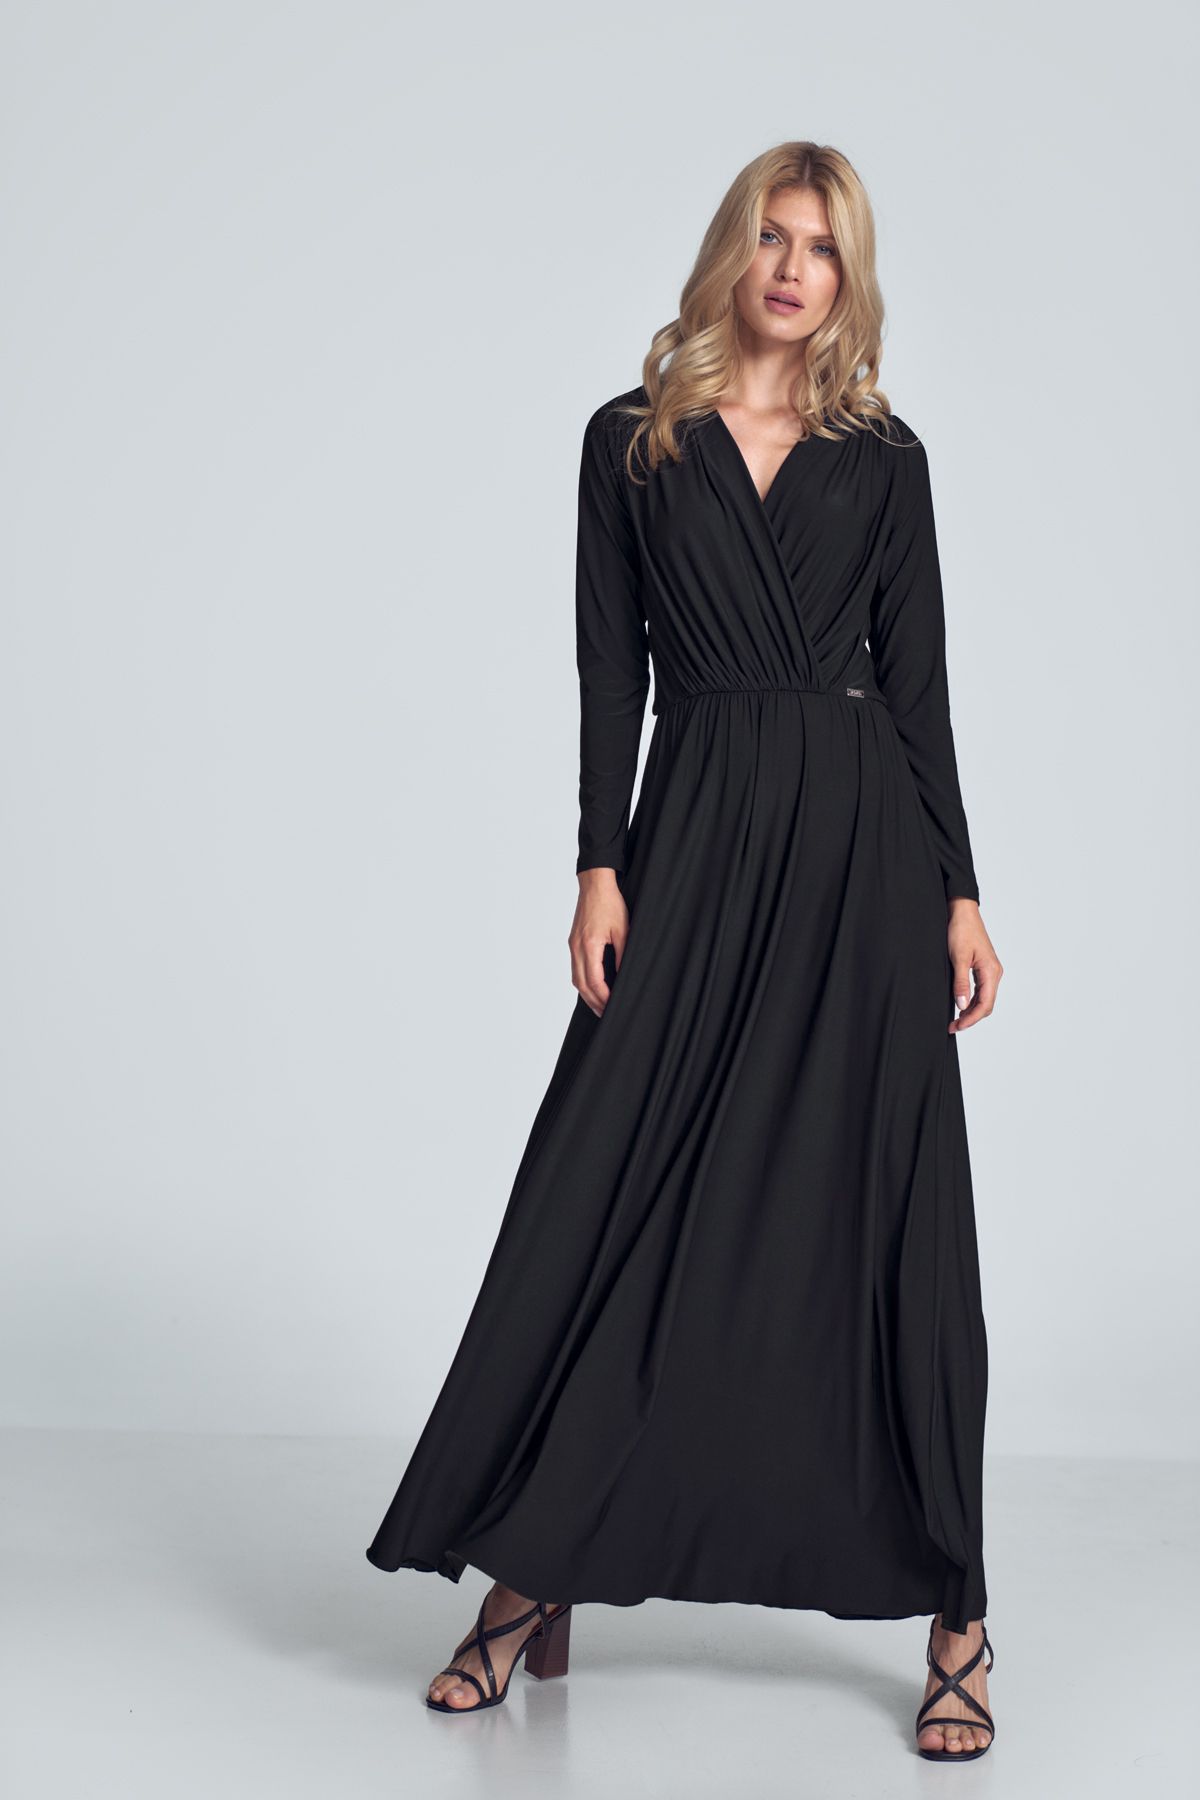 Black maxi dress with long sleeves, wrap creased neckline, elasticated band sewn in the waist.